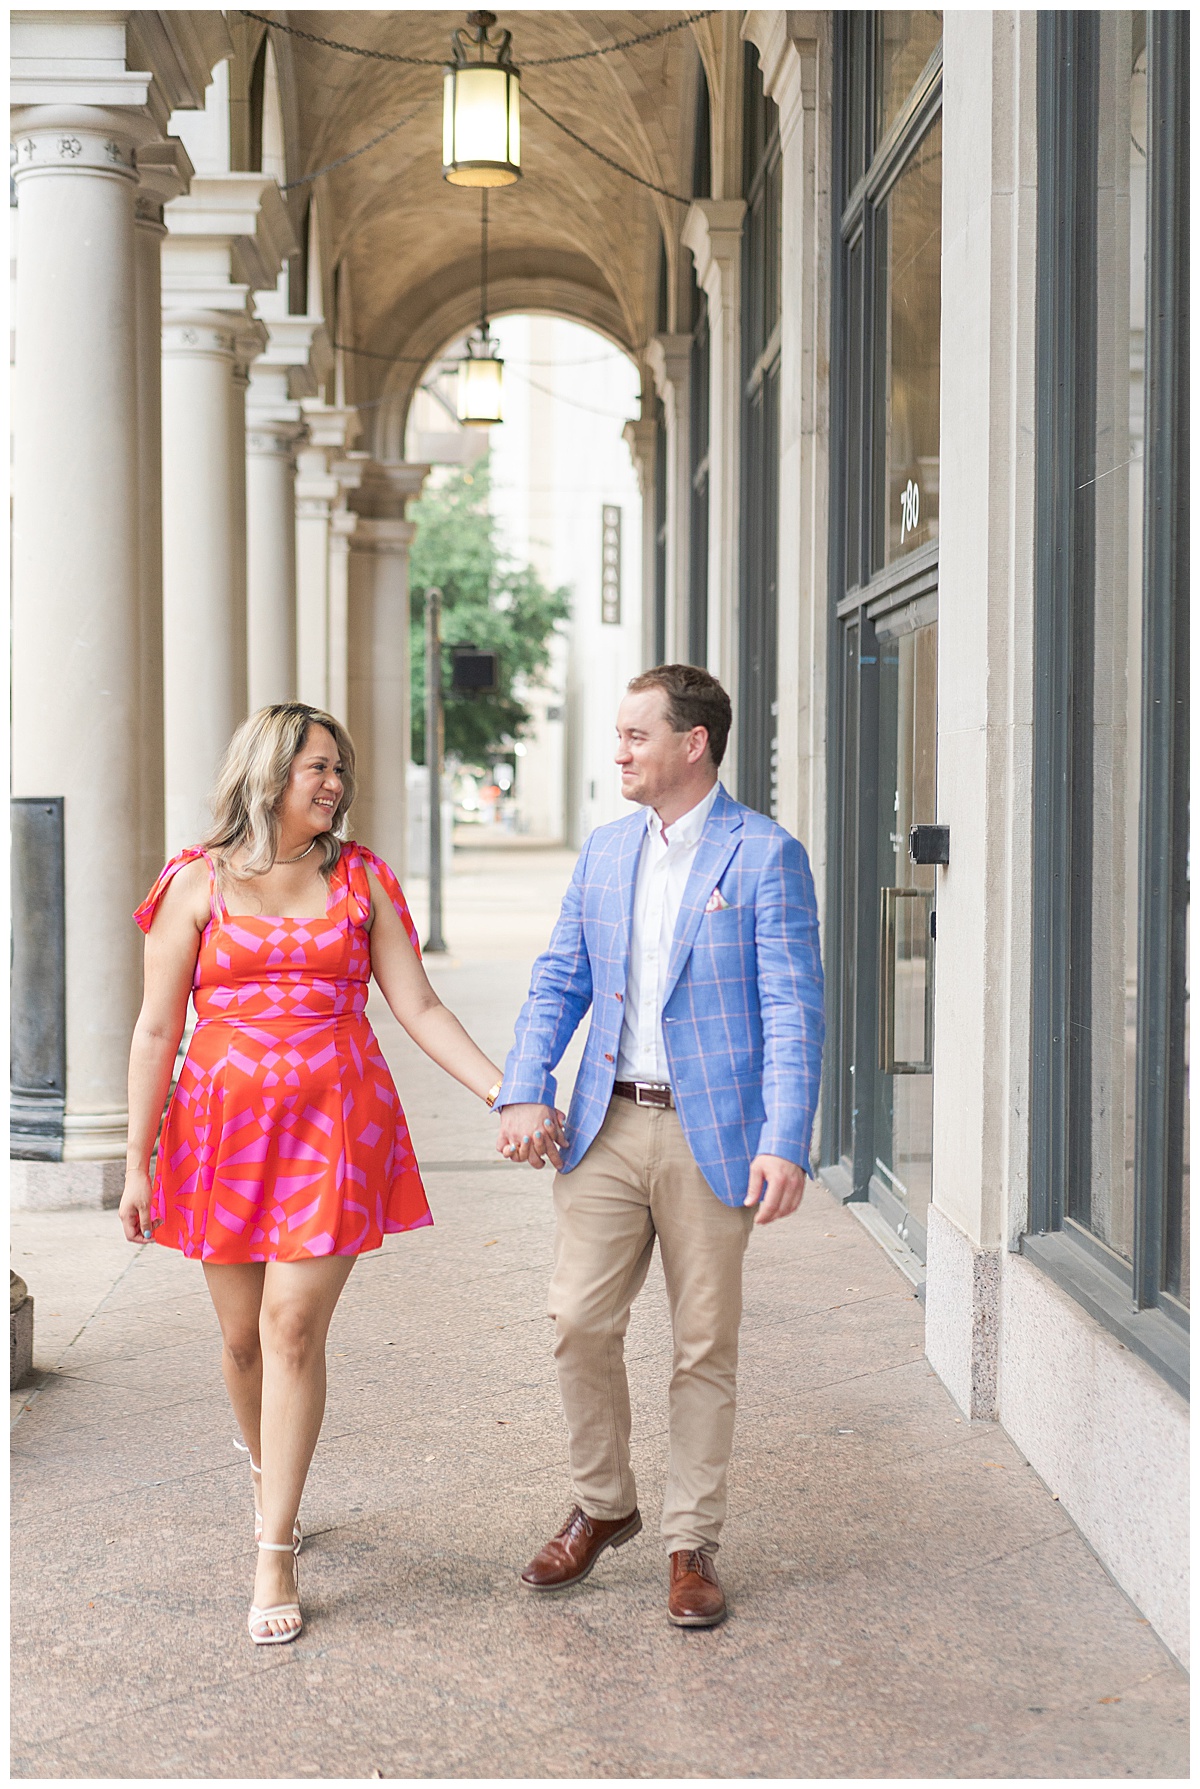 Two people walk hand in hand together for Houston’s Best Wedding Photographers